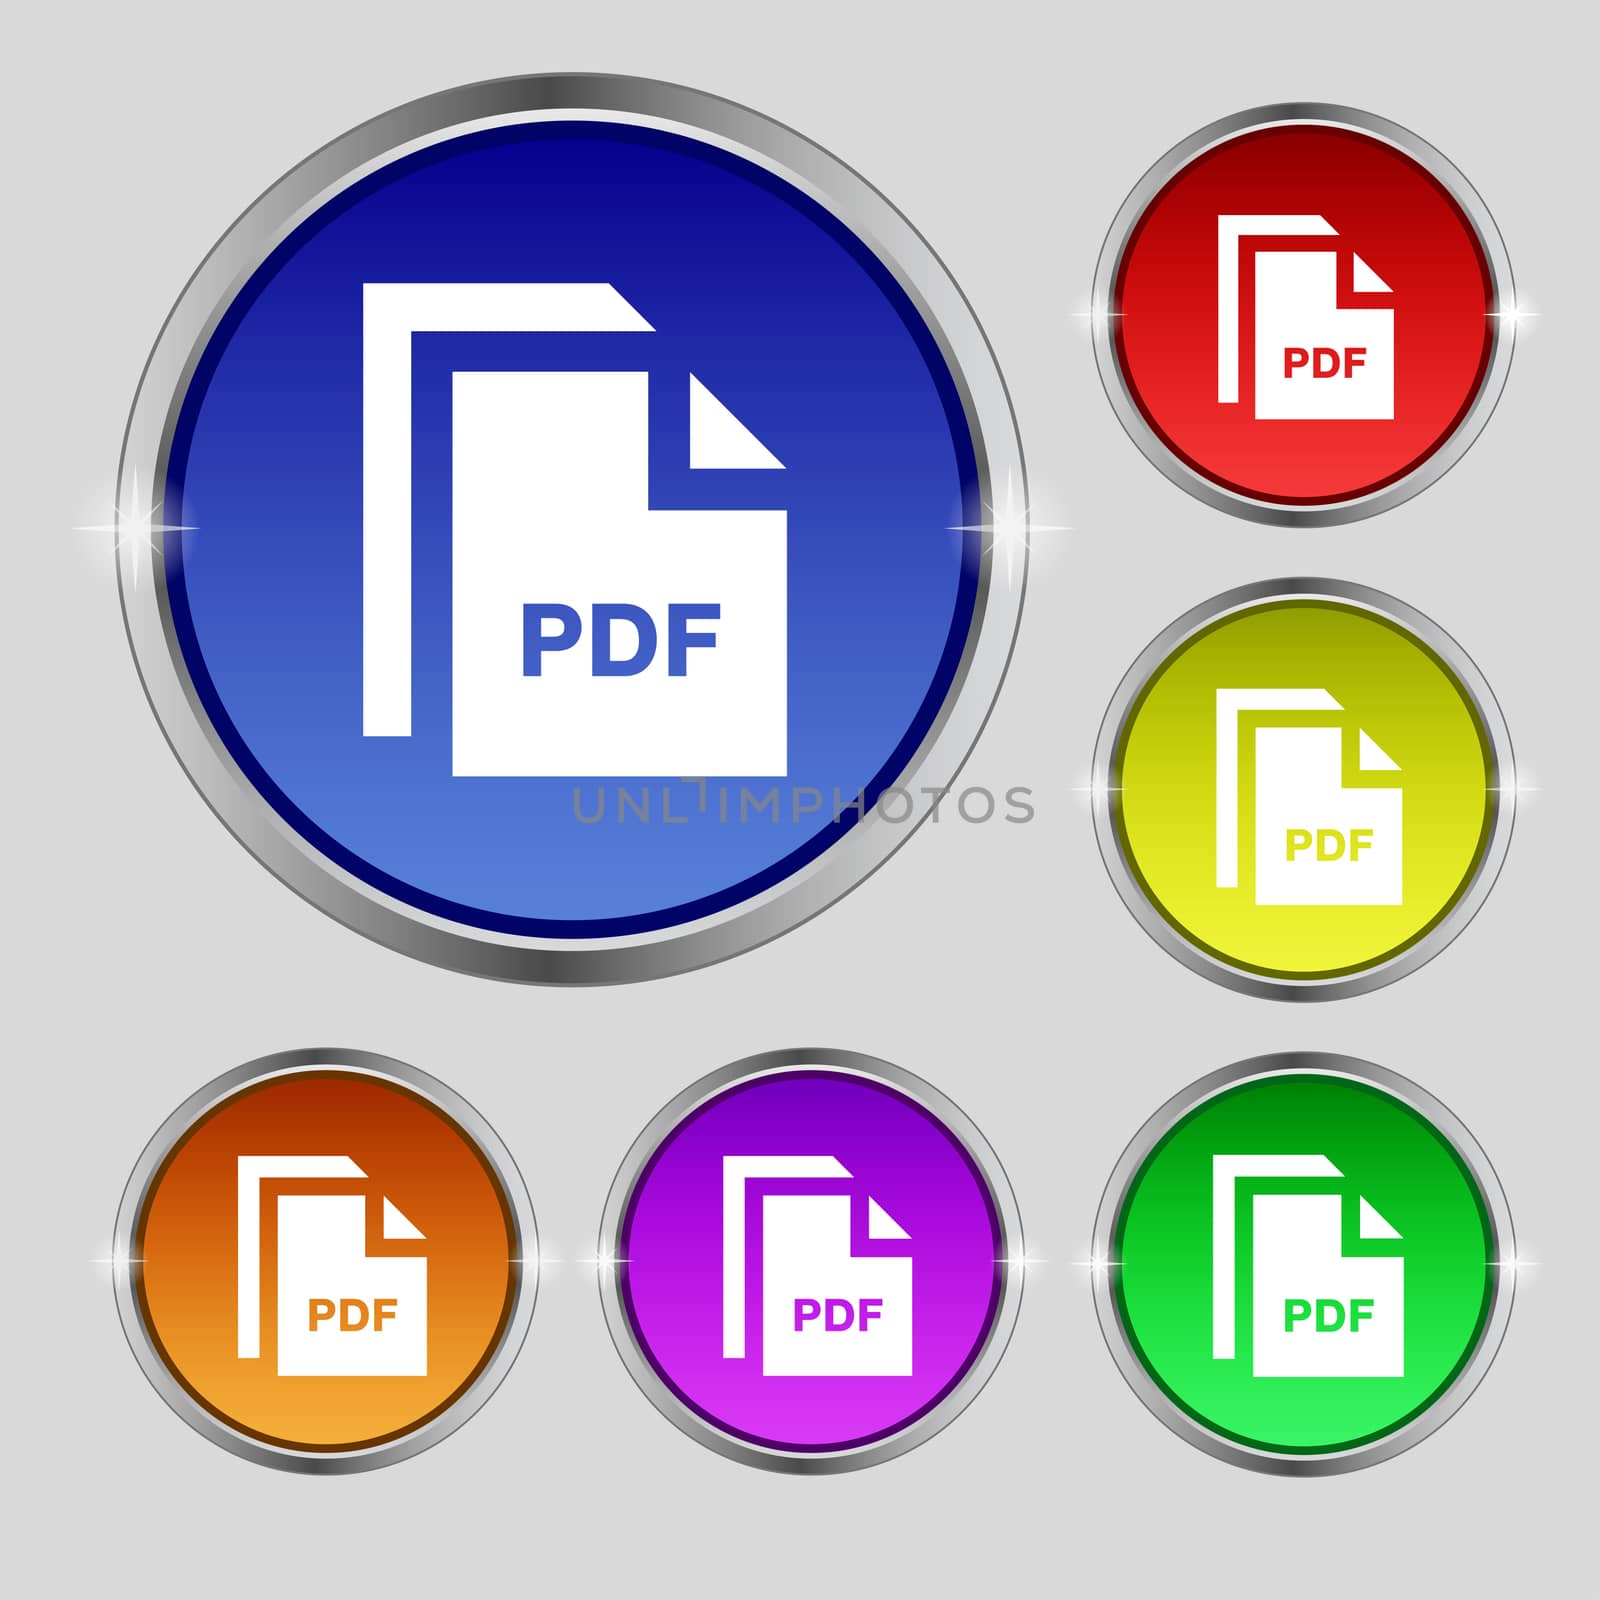 file PDF icon sign. Round symbol on bright colourful buttons. illustration